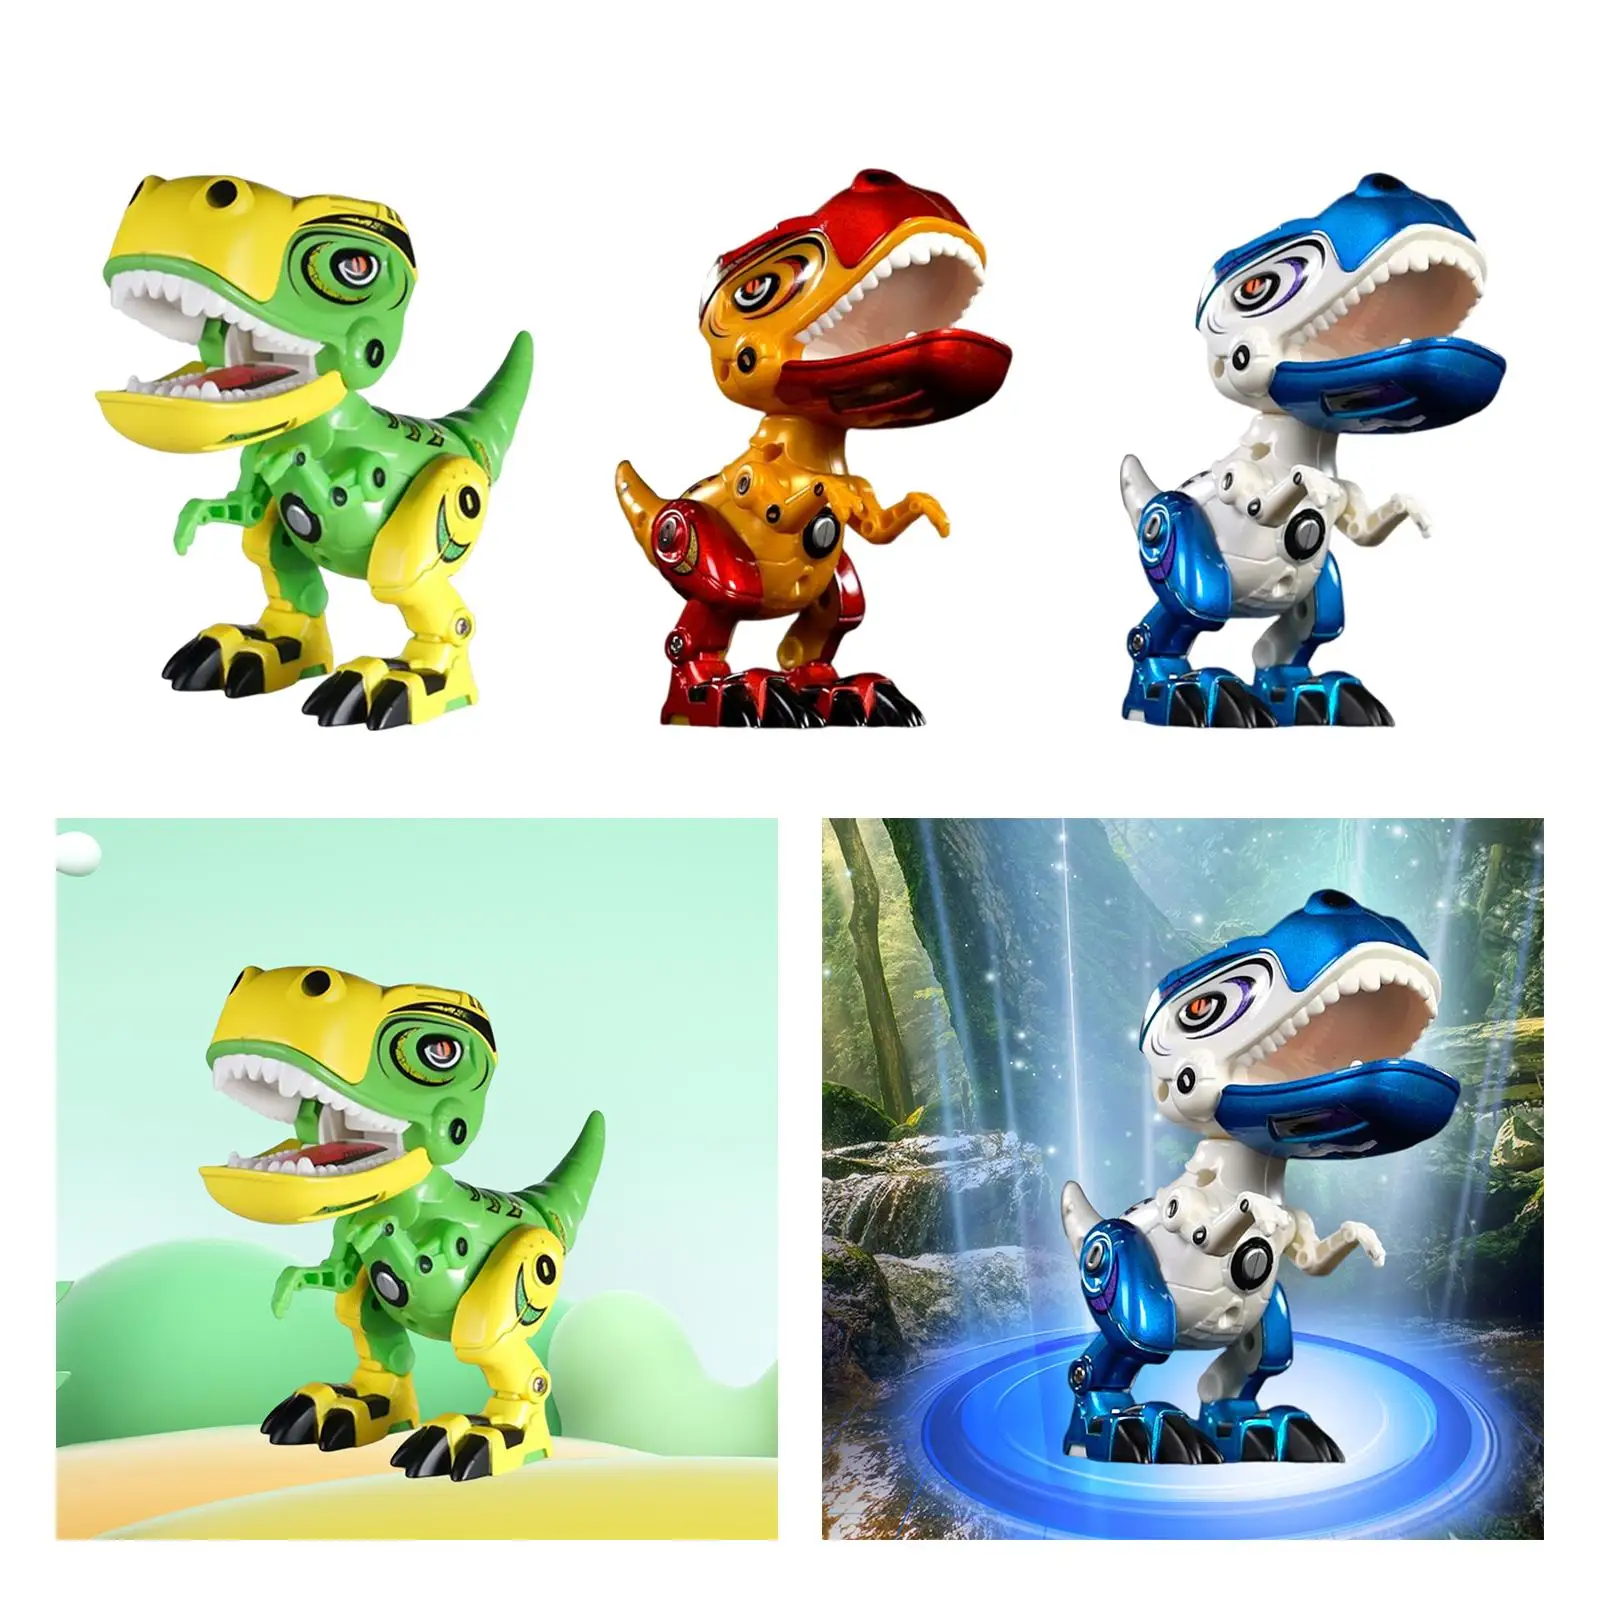 Realistic Electric Dinosaur Toy Dinosaur Action Toy Figures with Sound and Light Early Education Toy for Children Girls Gifts